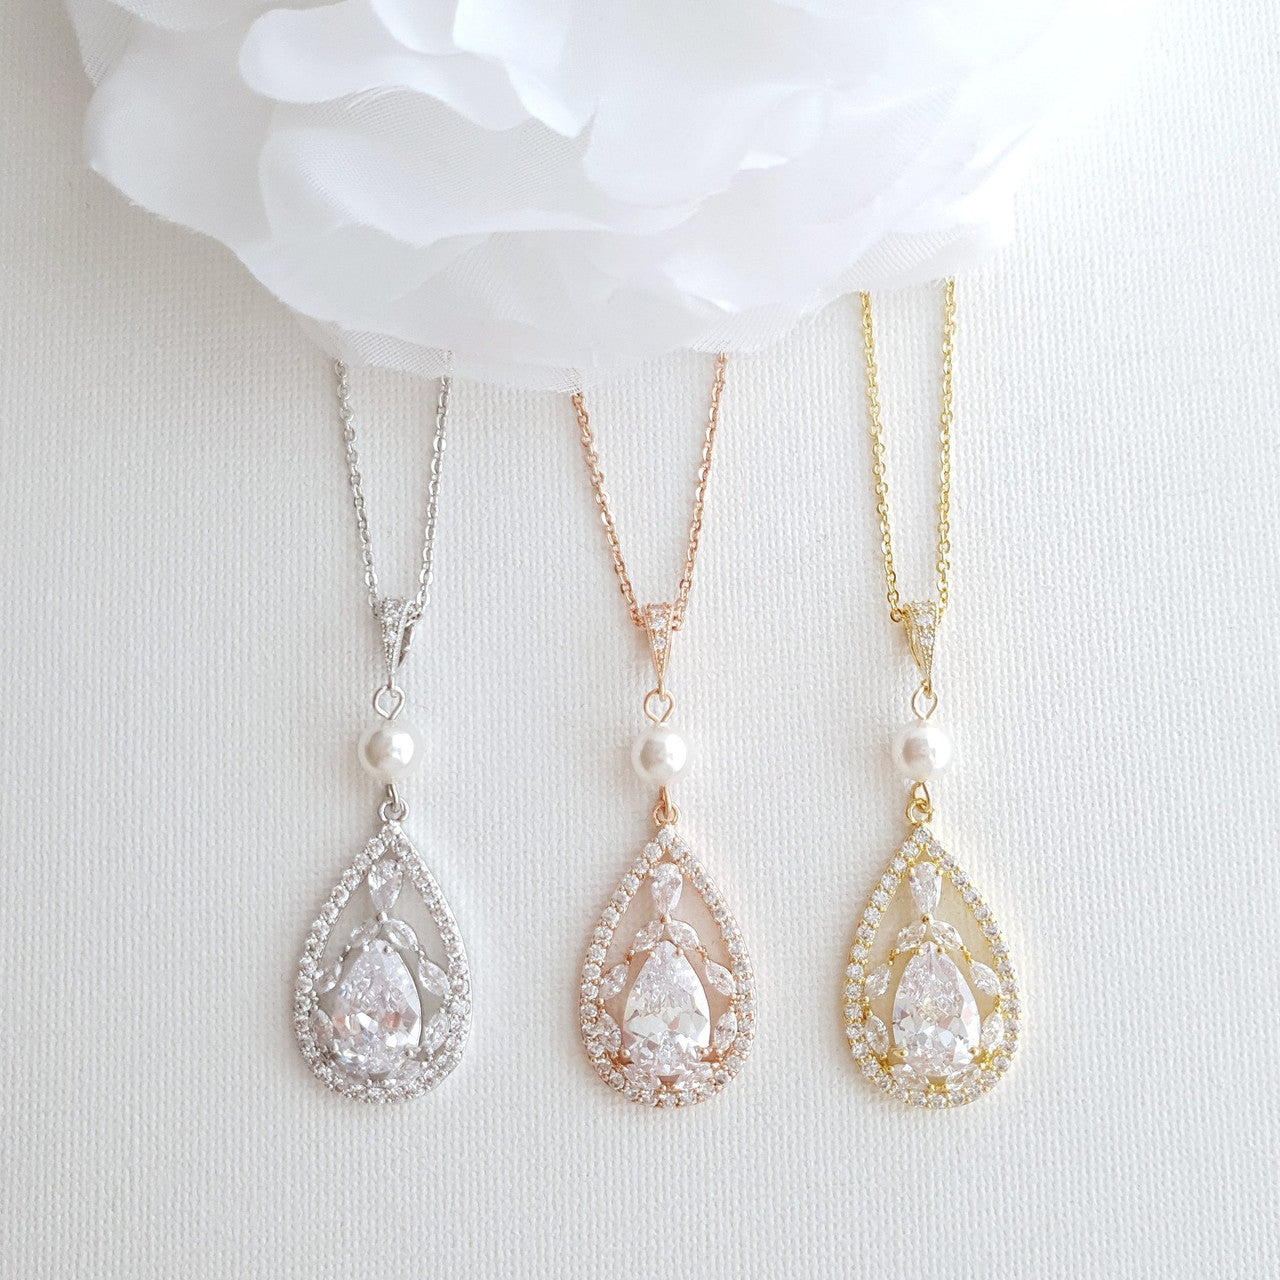 Bridal Pendant Necklace with Teardrop CZ Crystals-Esther